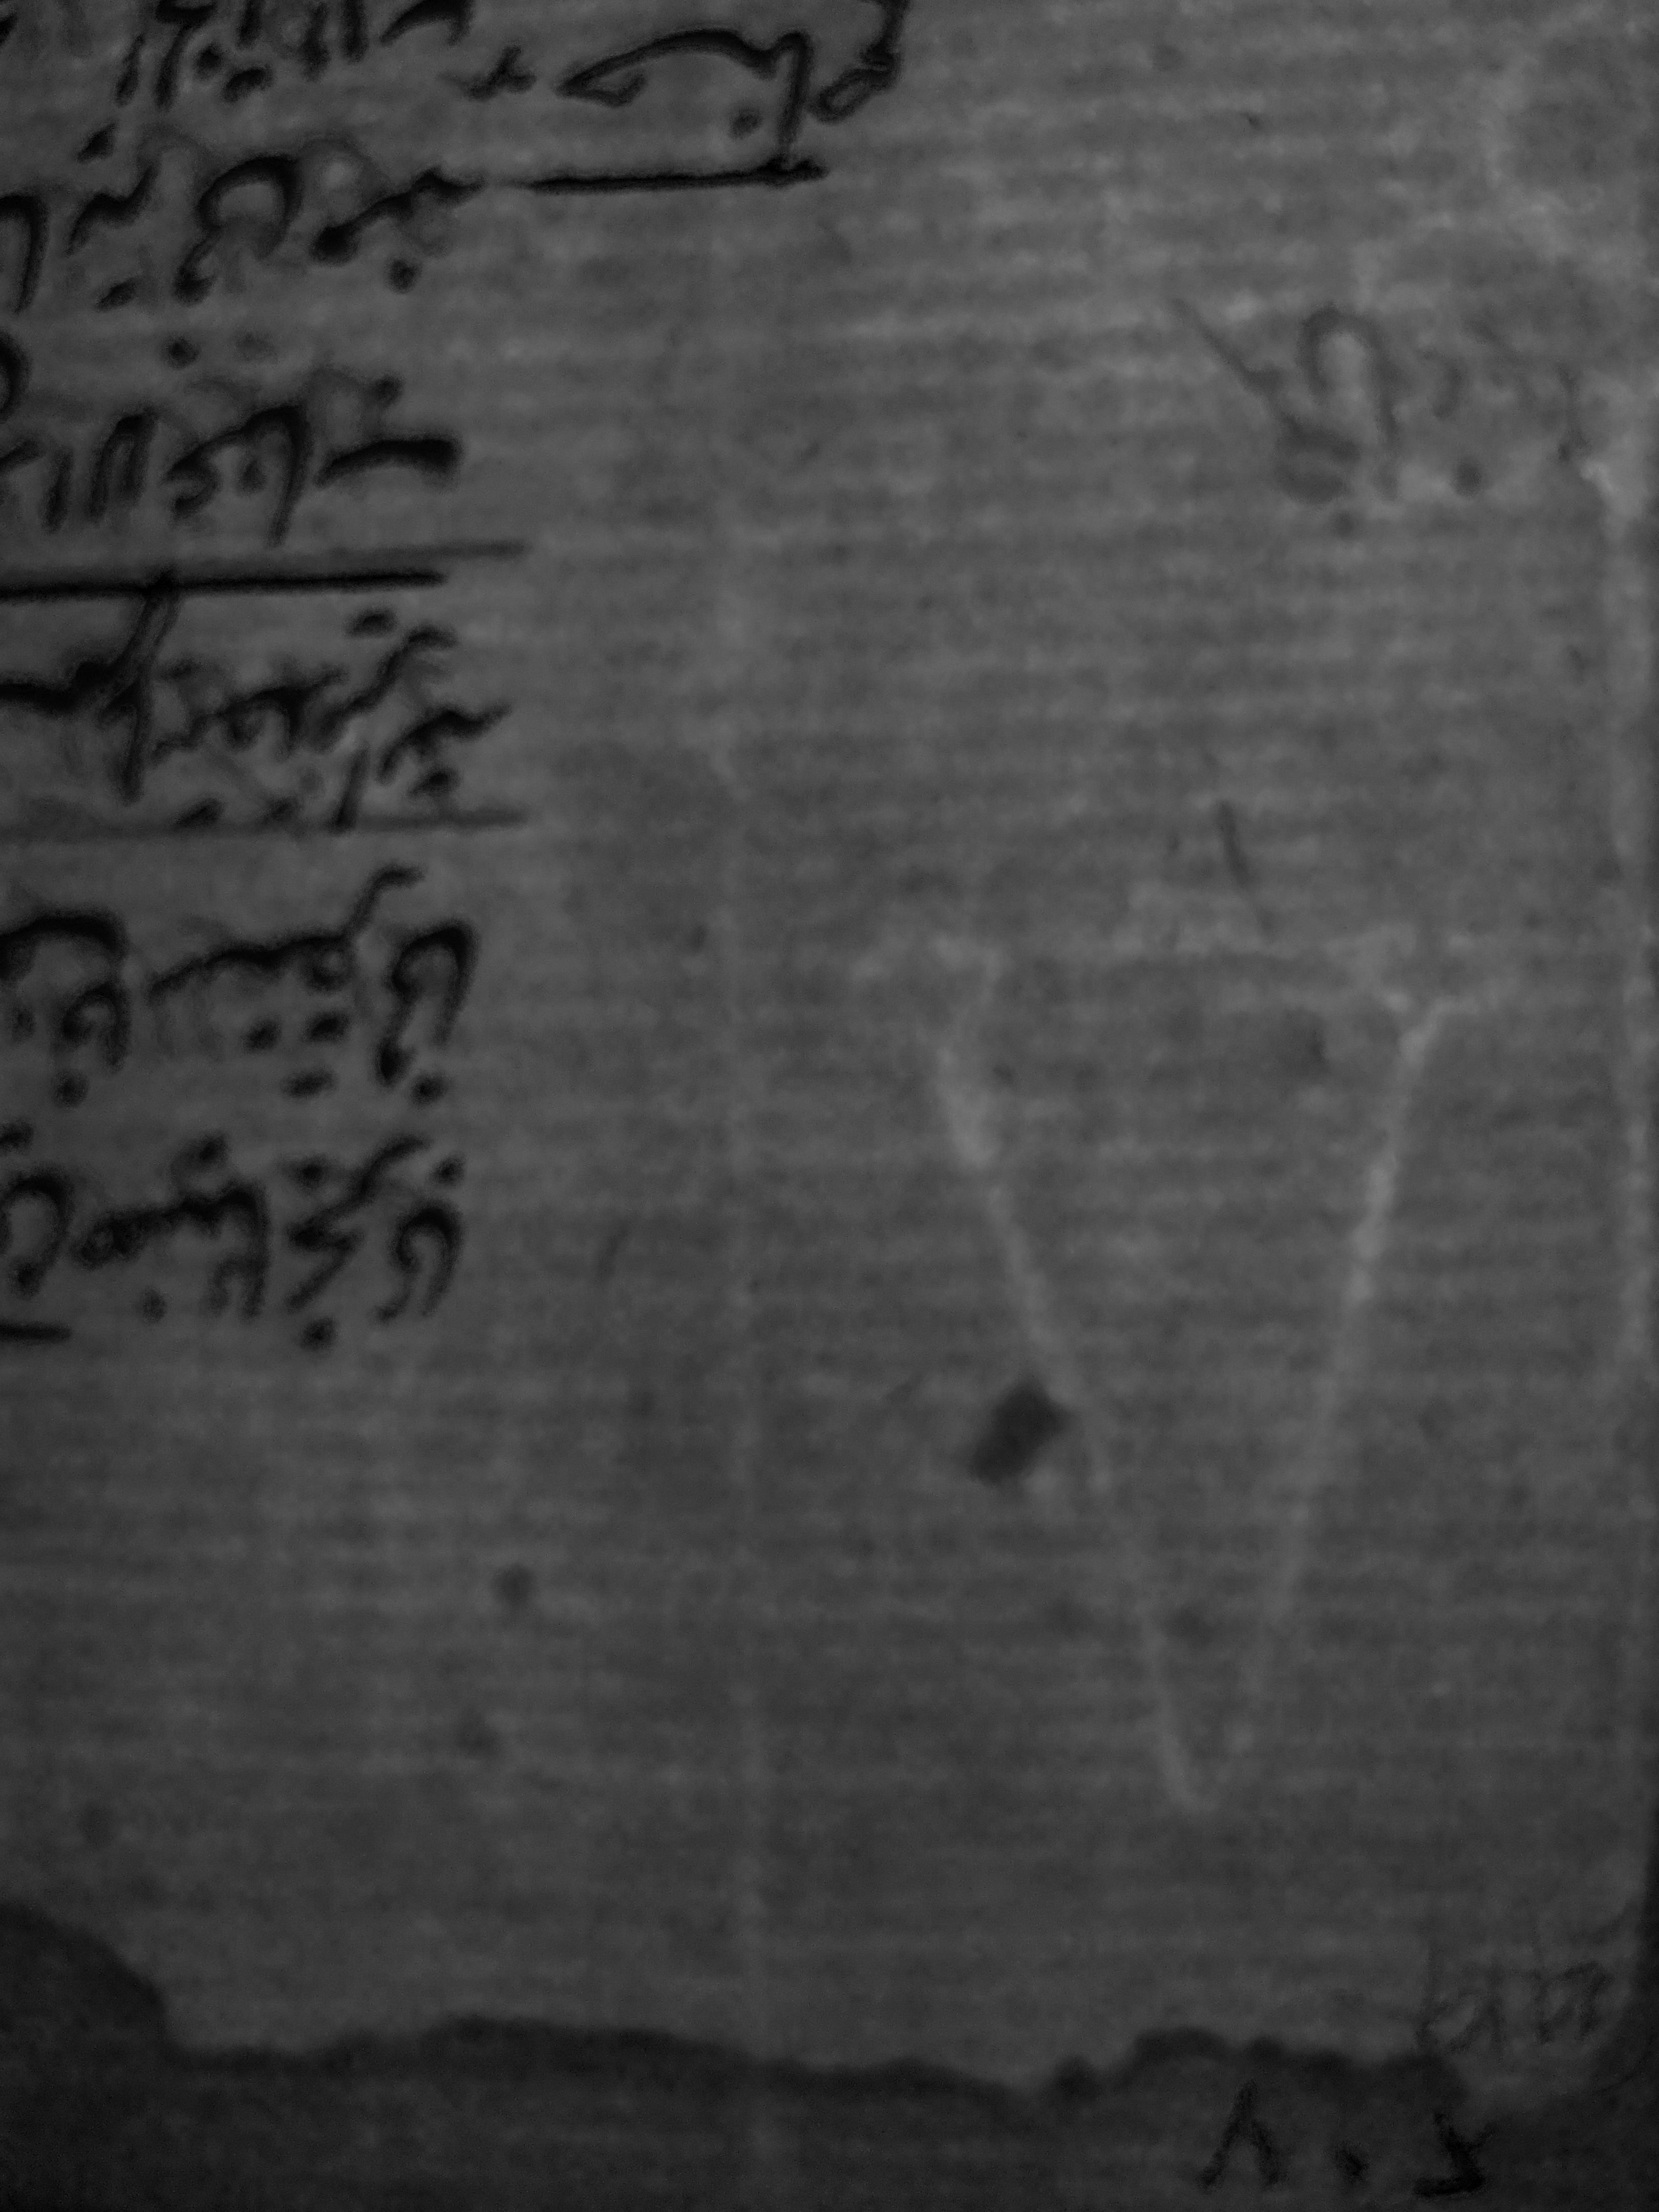 Countermark with "V" visible under trefoil accompanying a three crescents watermark in Isl. Ms. 454.